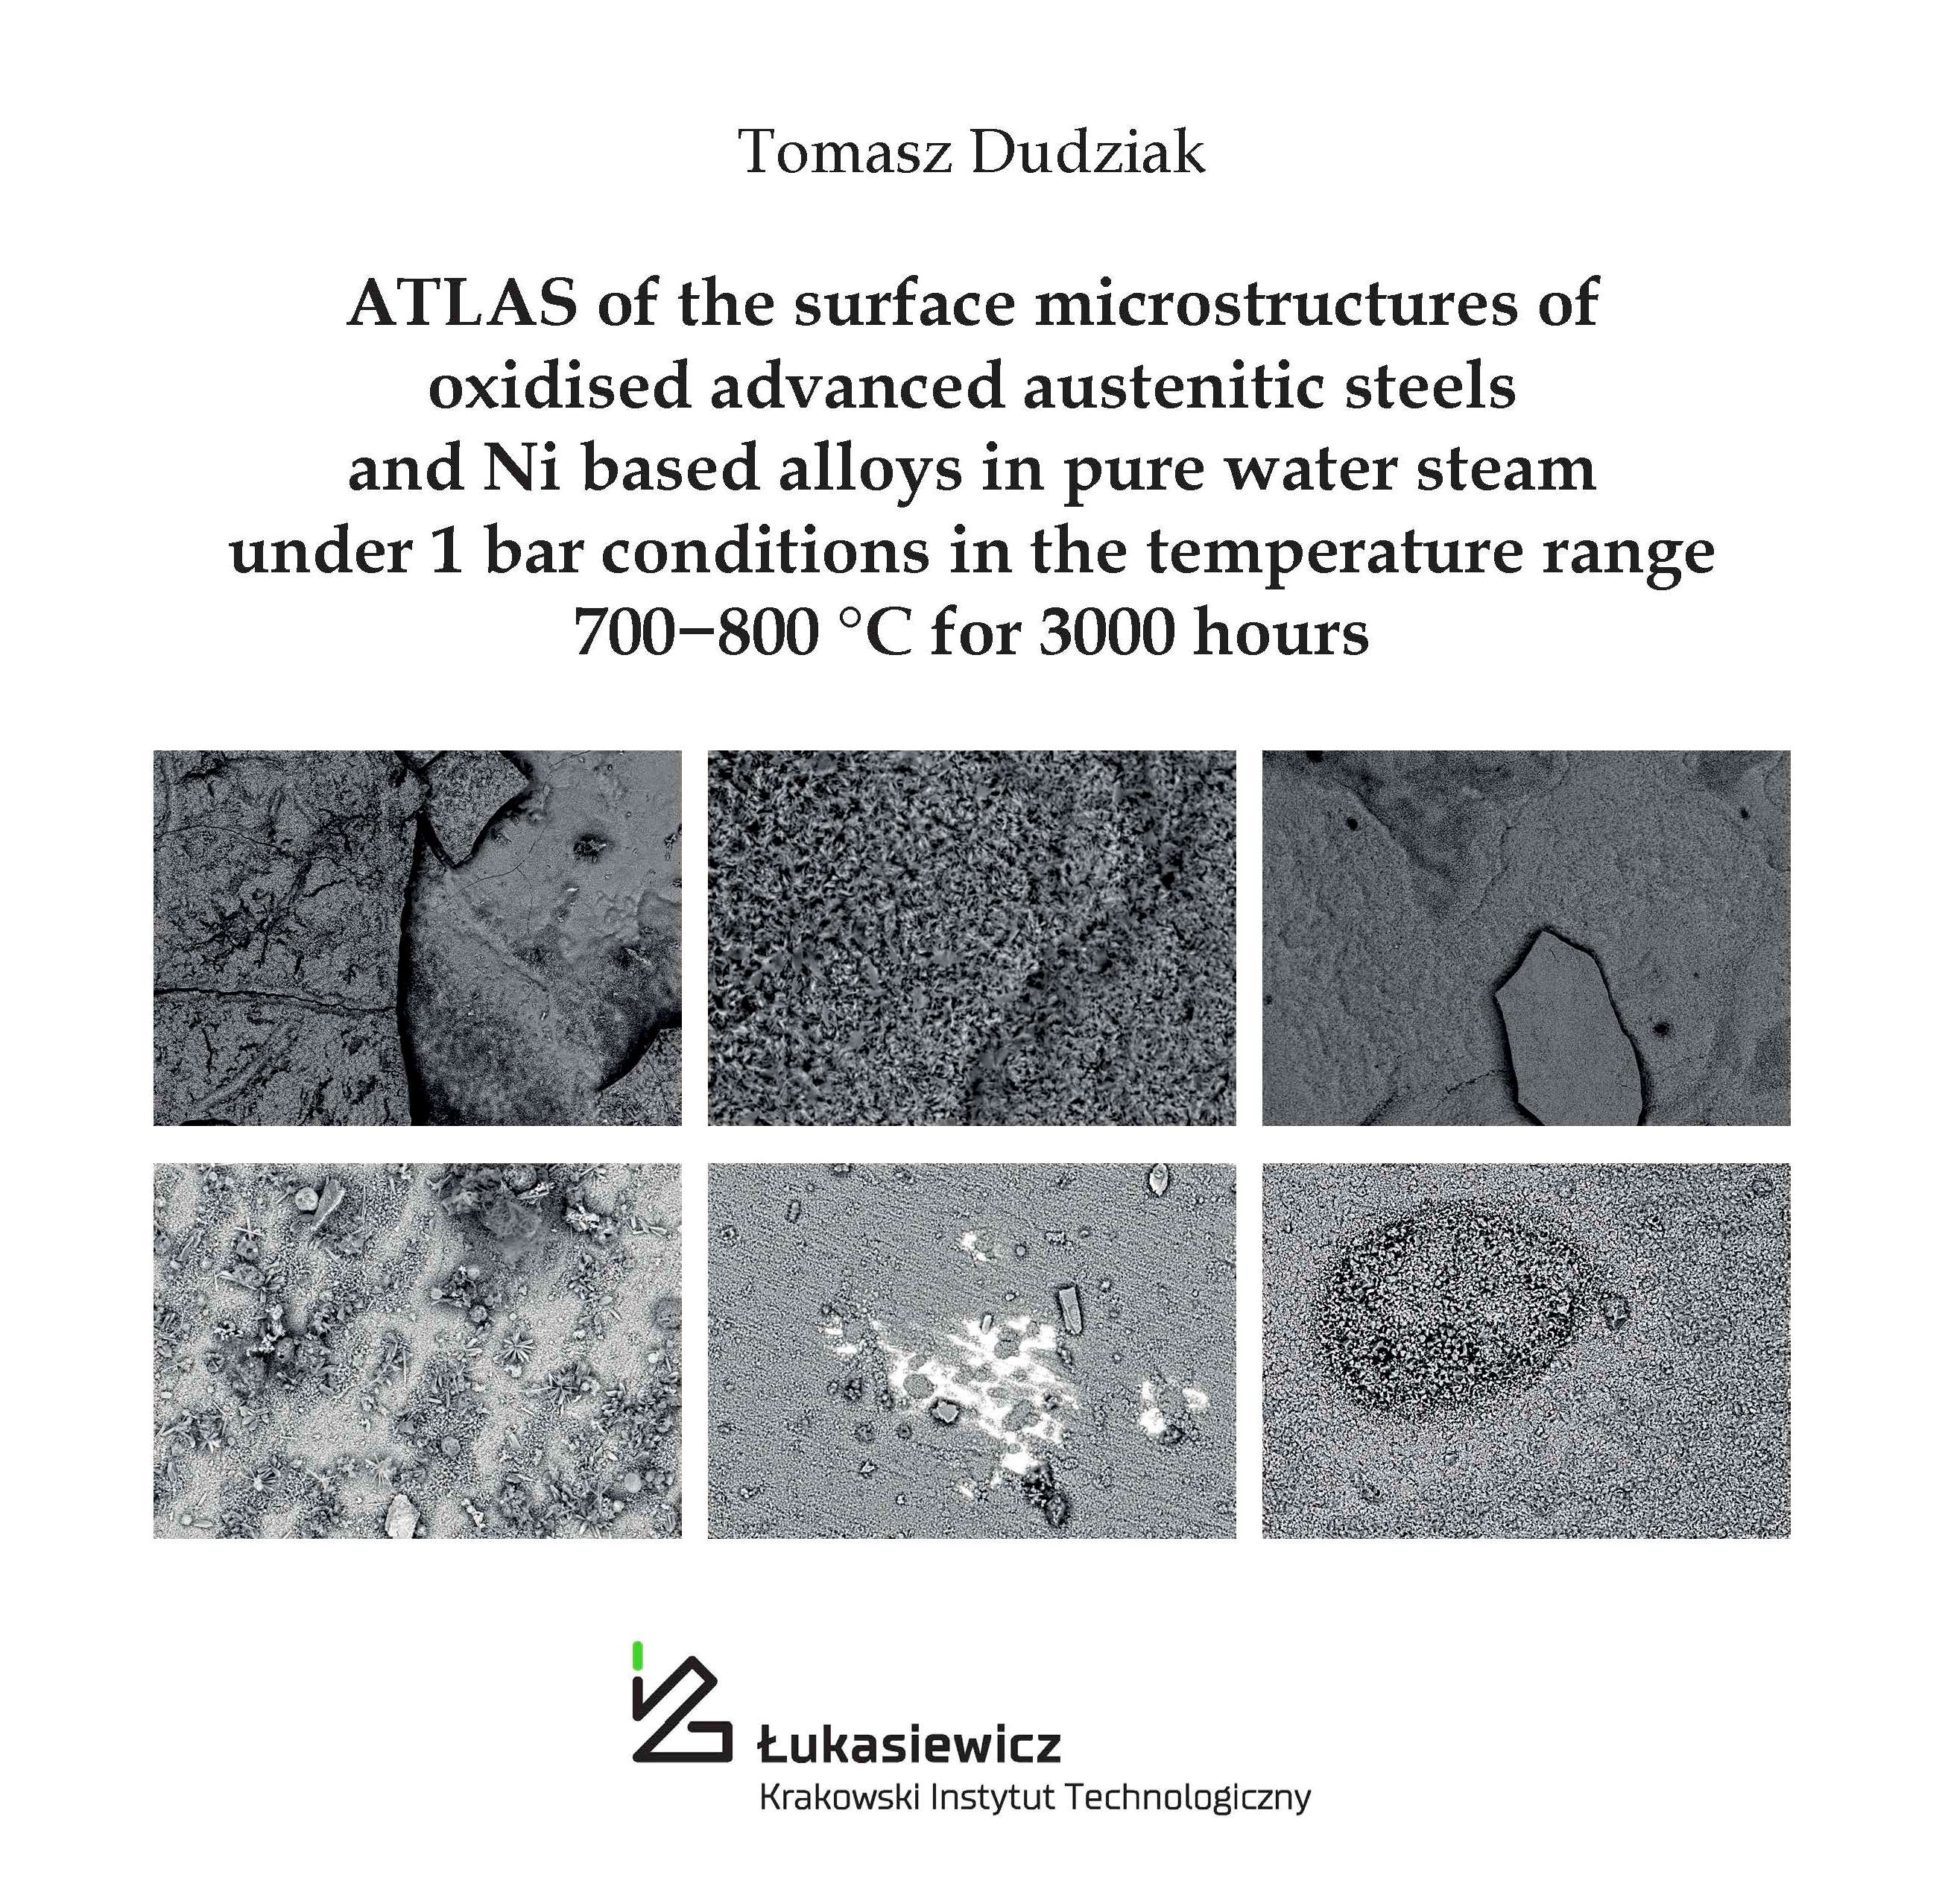 ATLAS of the surface microstructures of oxidised advanced austenitic steels and Ni based alloys in pure water steam under 1 bar conditions in the temperature range 700−800 °C for 3000 hours